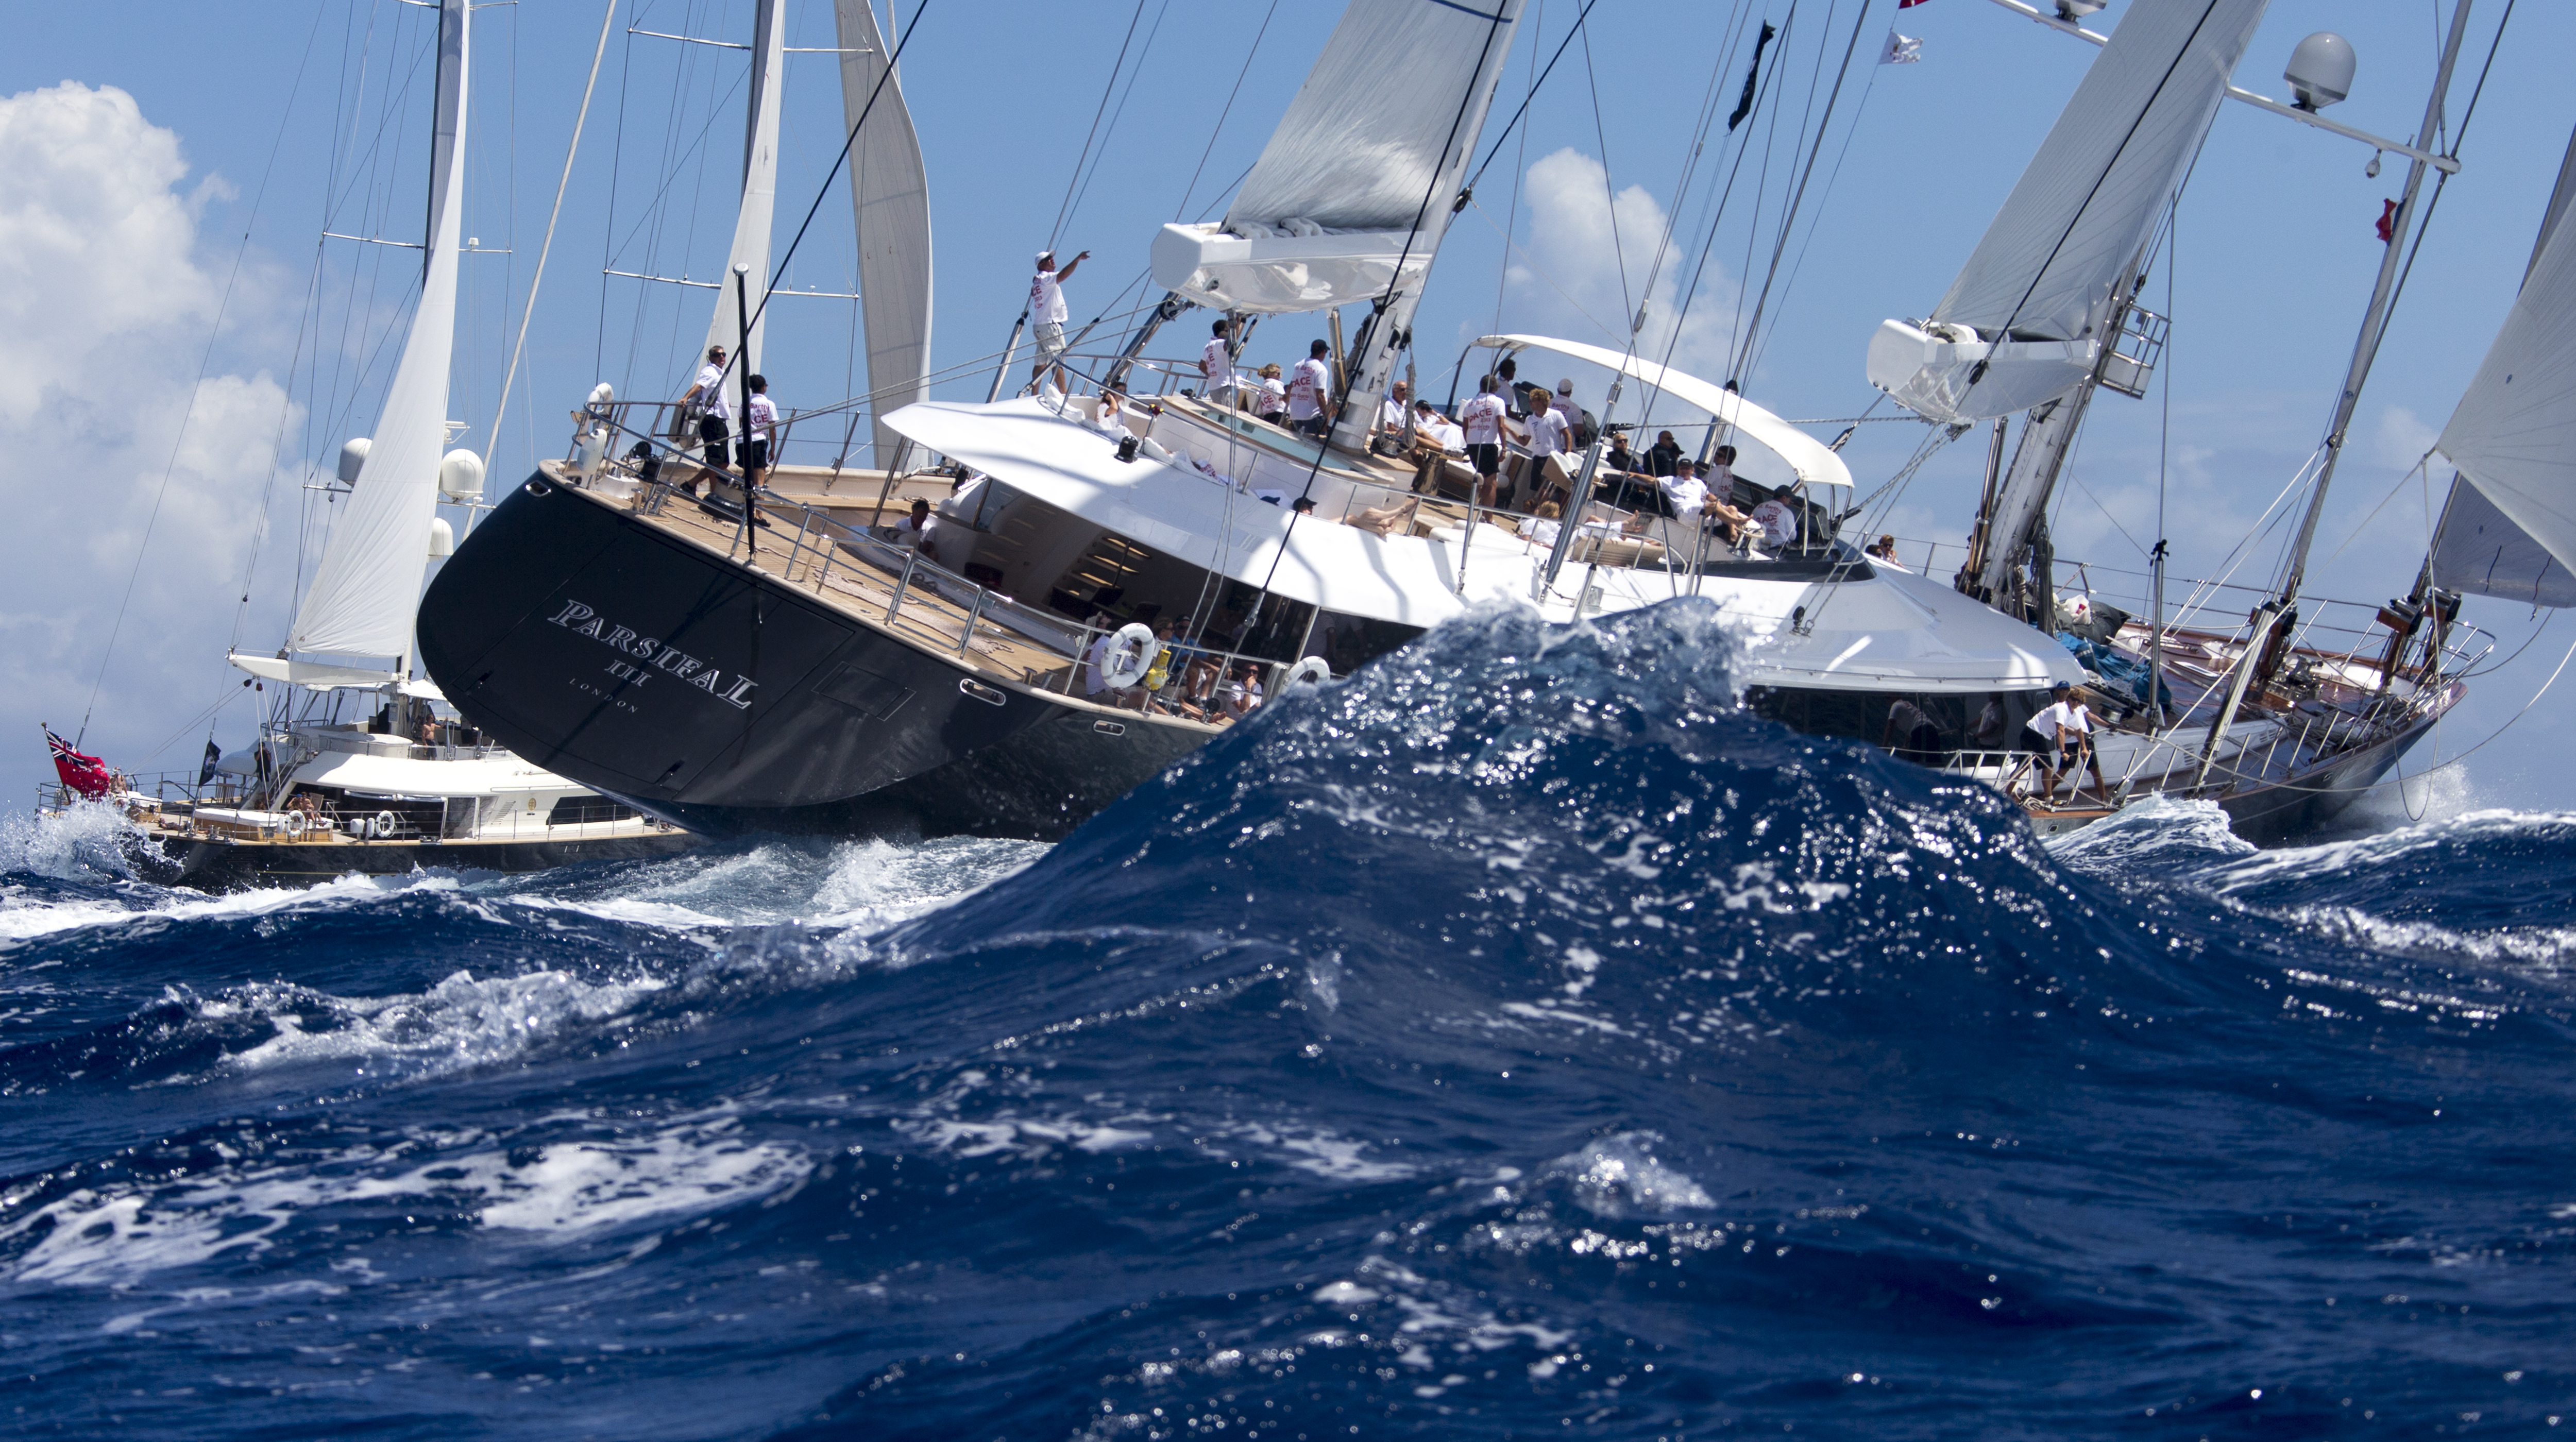 Yacht PARSIFAL Races At The St Barth Bucket 